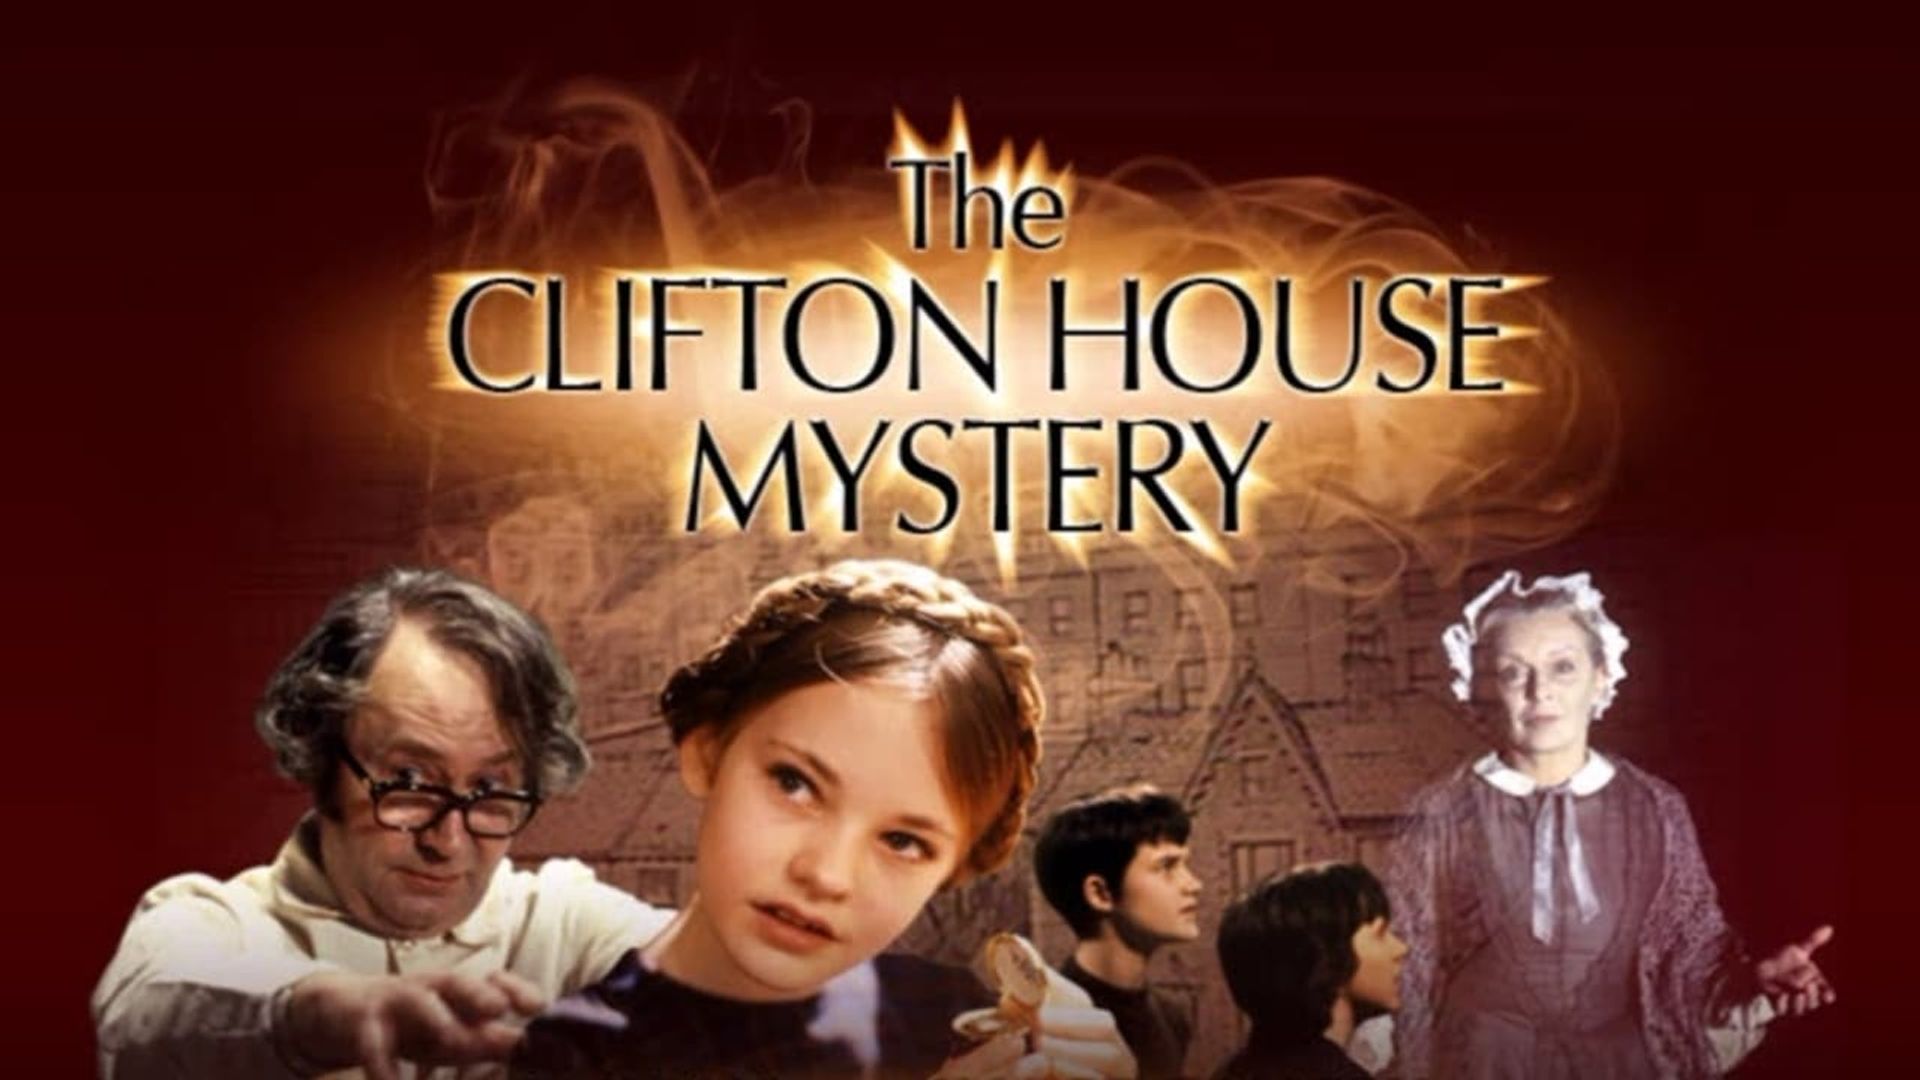 The Clifton House Mystery background